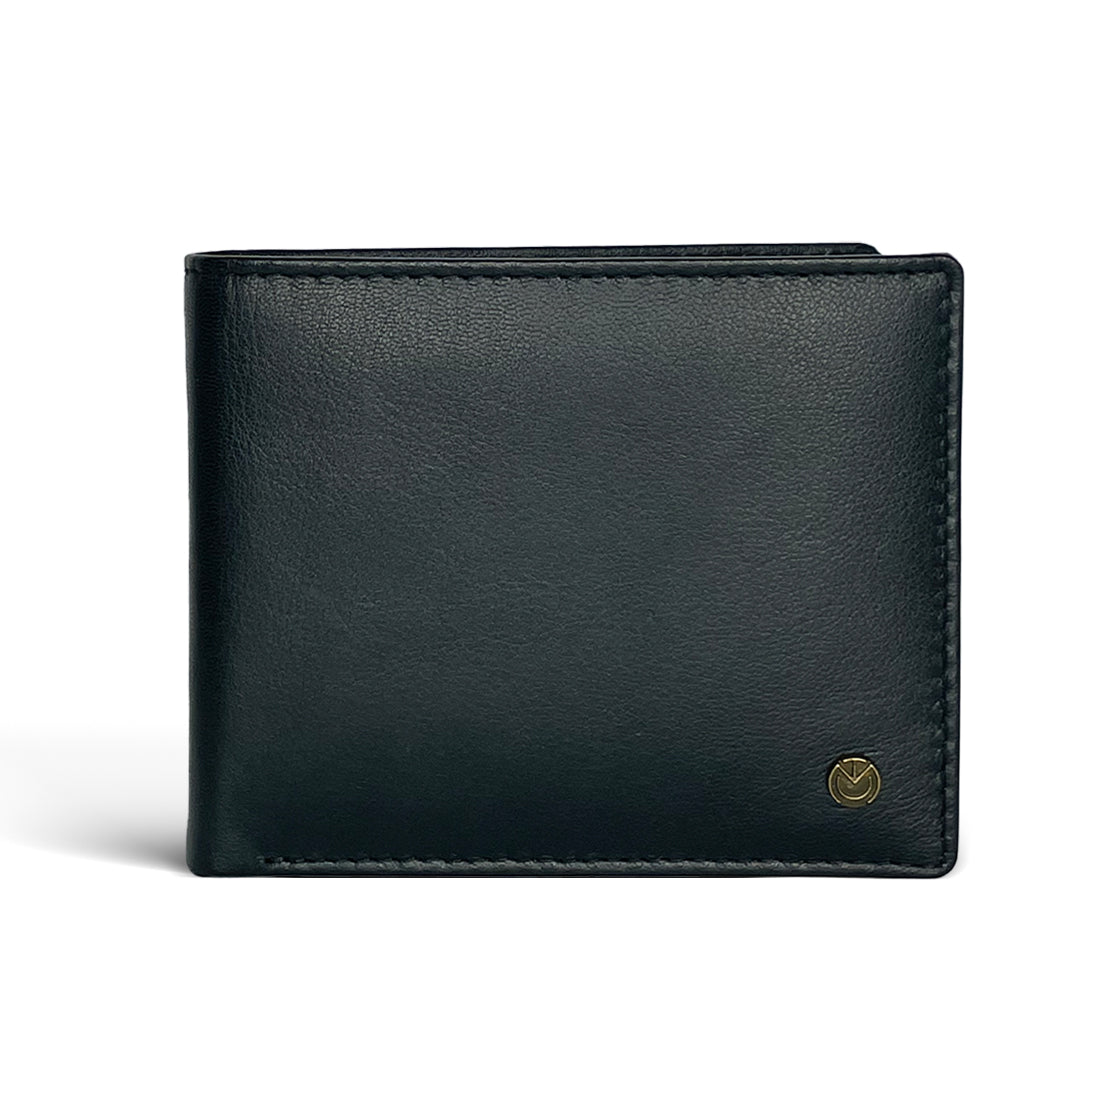 NAPA HIDE Leather Wallet for Men I 6 Card Slots I 2 Currency Compartme –  WILDHORN